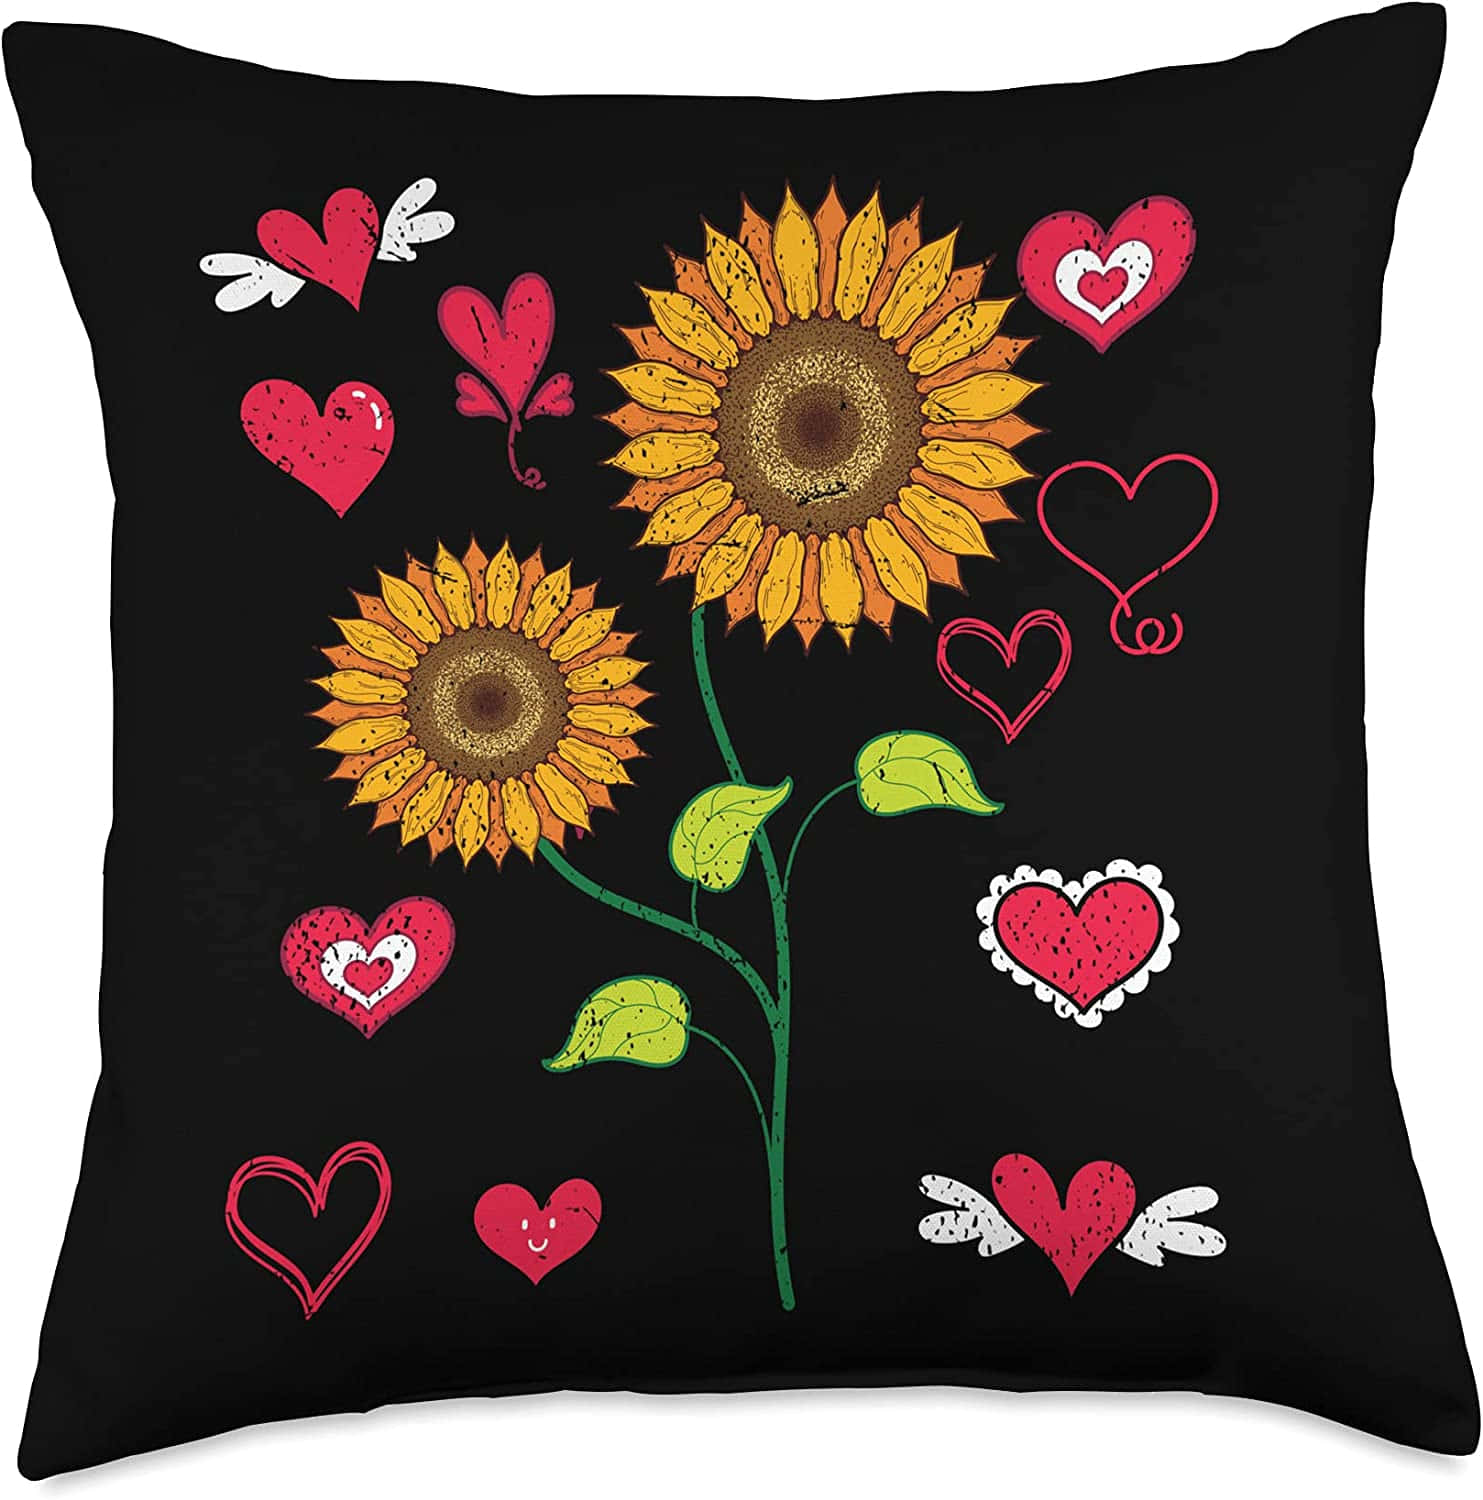 A Black Pillow With Sunflowers And Hearts On It